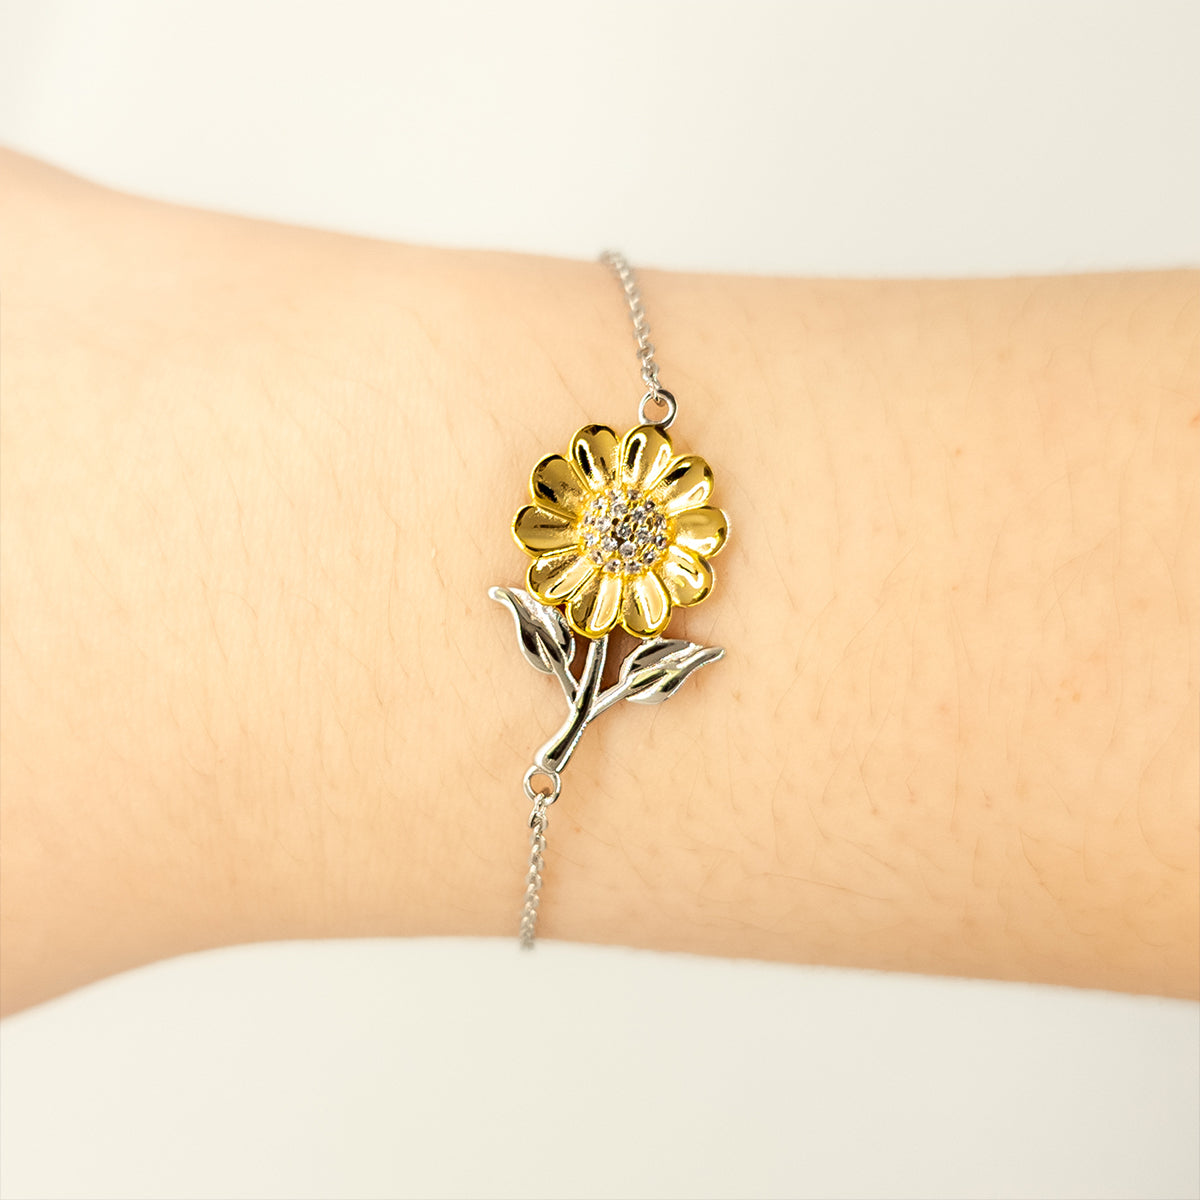 To My Amazing Grandson Supporting Sunflower Bracelet, Life is an adventure waiting to be explored, Birthday Unique Gifts for Grandson from Gigi